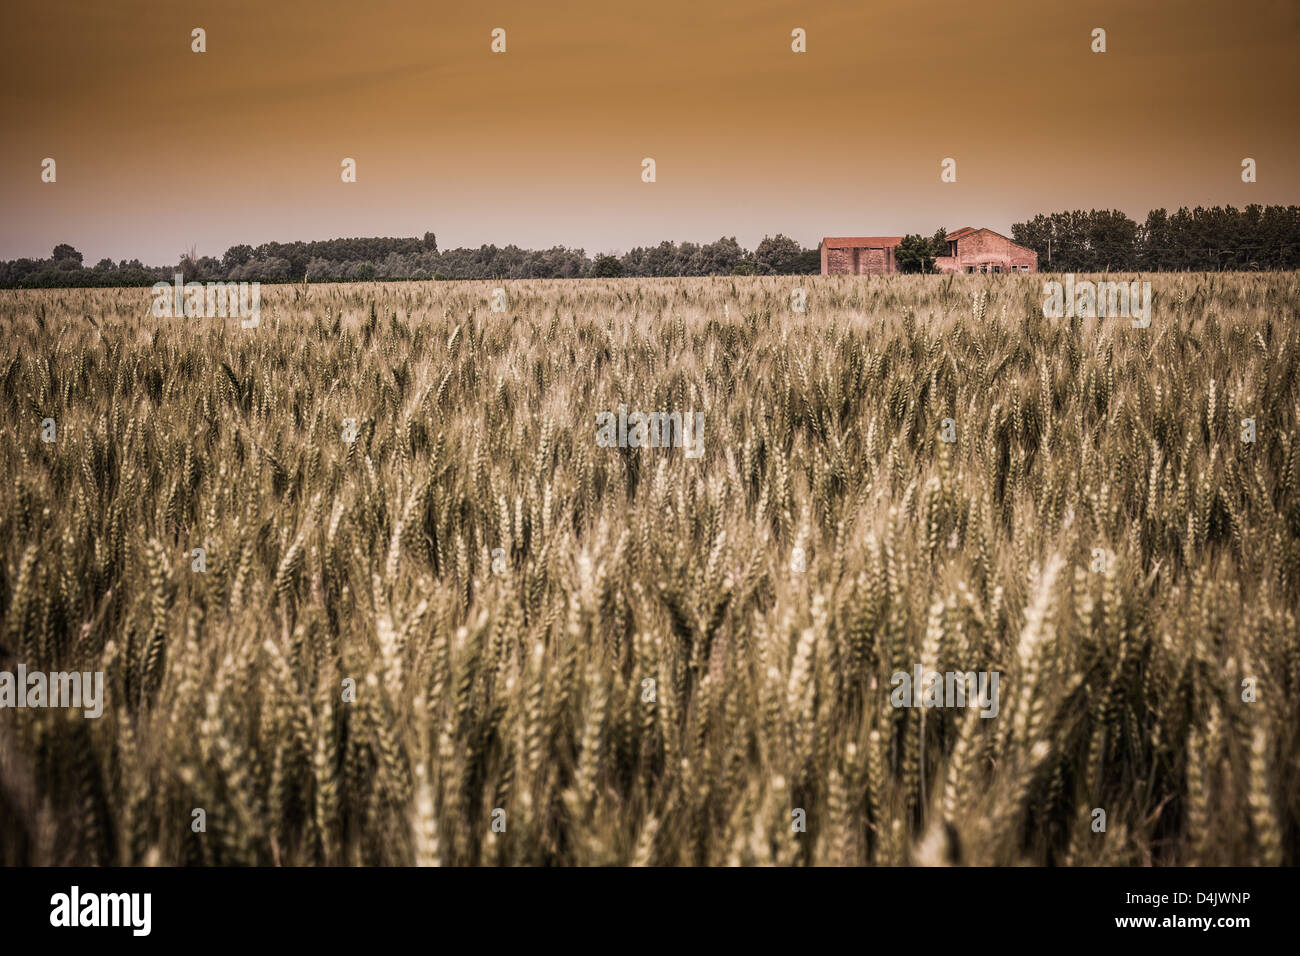 Field of tall grass in rural landscape Stock Photo